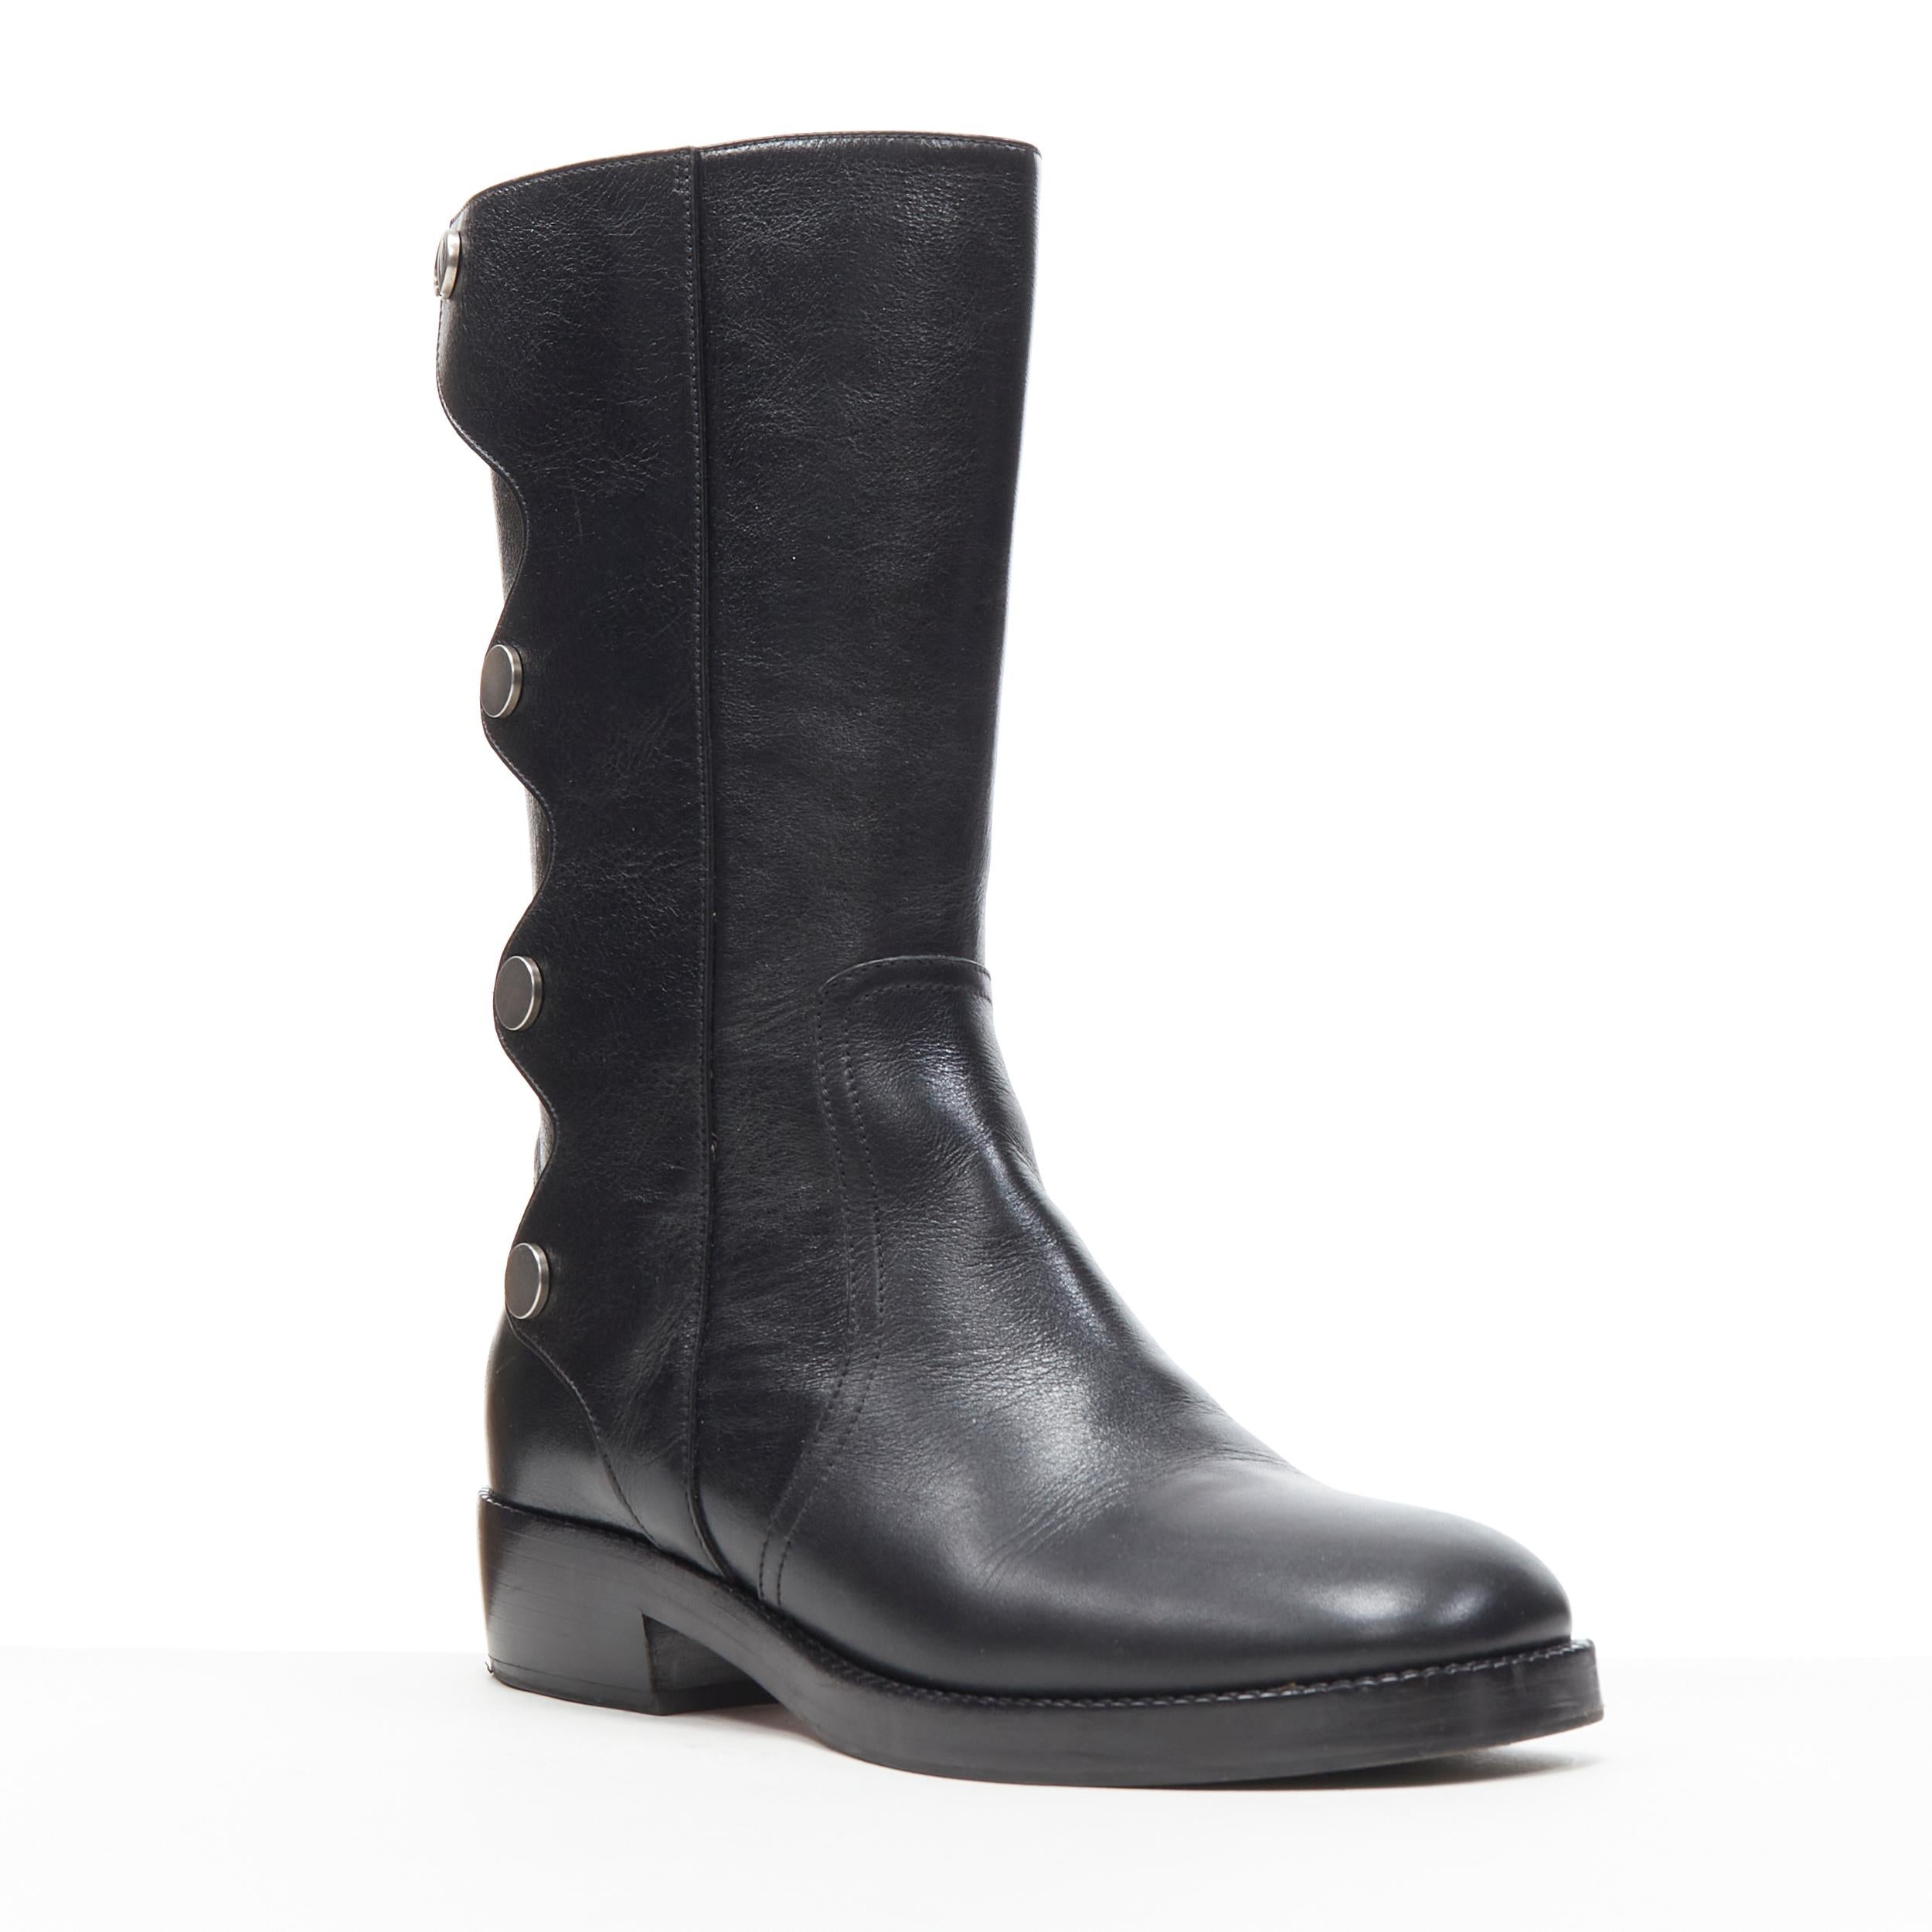 CHRISTIAN DIOR Diorodeo shiny calfskin leather tall flat riding boot EU38 D 
Reference: AYYP/A00006 
Brand: Christian Dior 
Material: Leather 
Color: Black 
Pattern: Solid
Closure: Button 
Extra Detail: Diorodeo boots. Silver tone hardware. CD logo